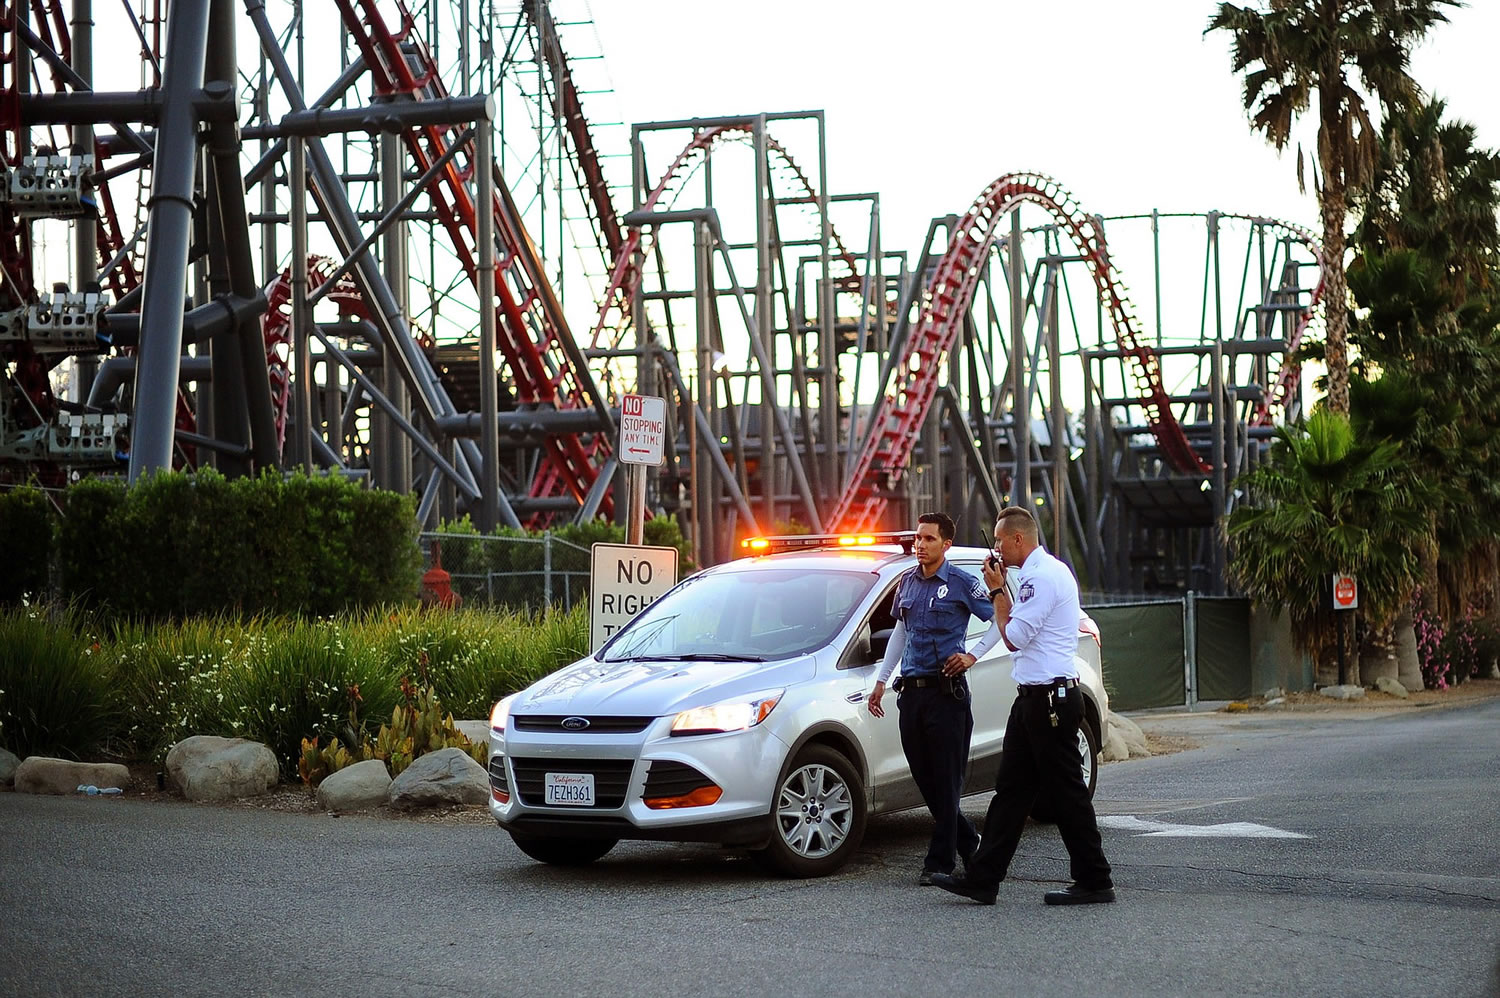 Members of the Six Flags Magic Mountain amusement park security staff monitor the situation at the exit of the park after riders were injured on the Ninja coaster Monday in Valencia, Calif.